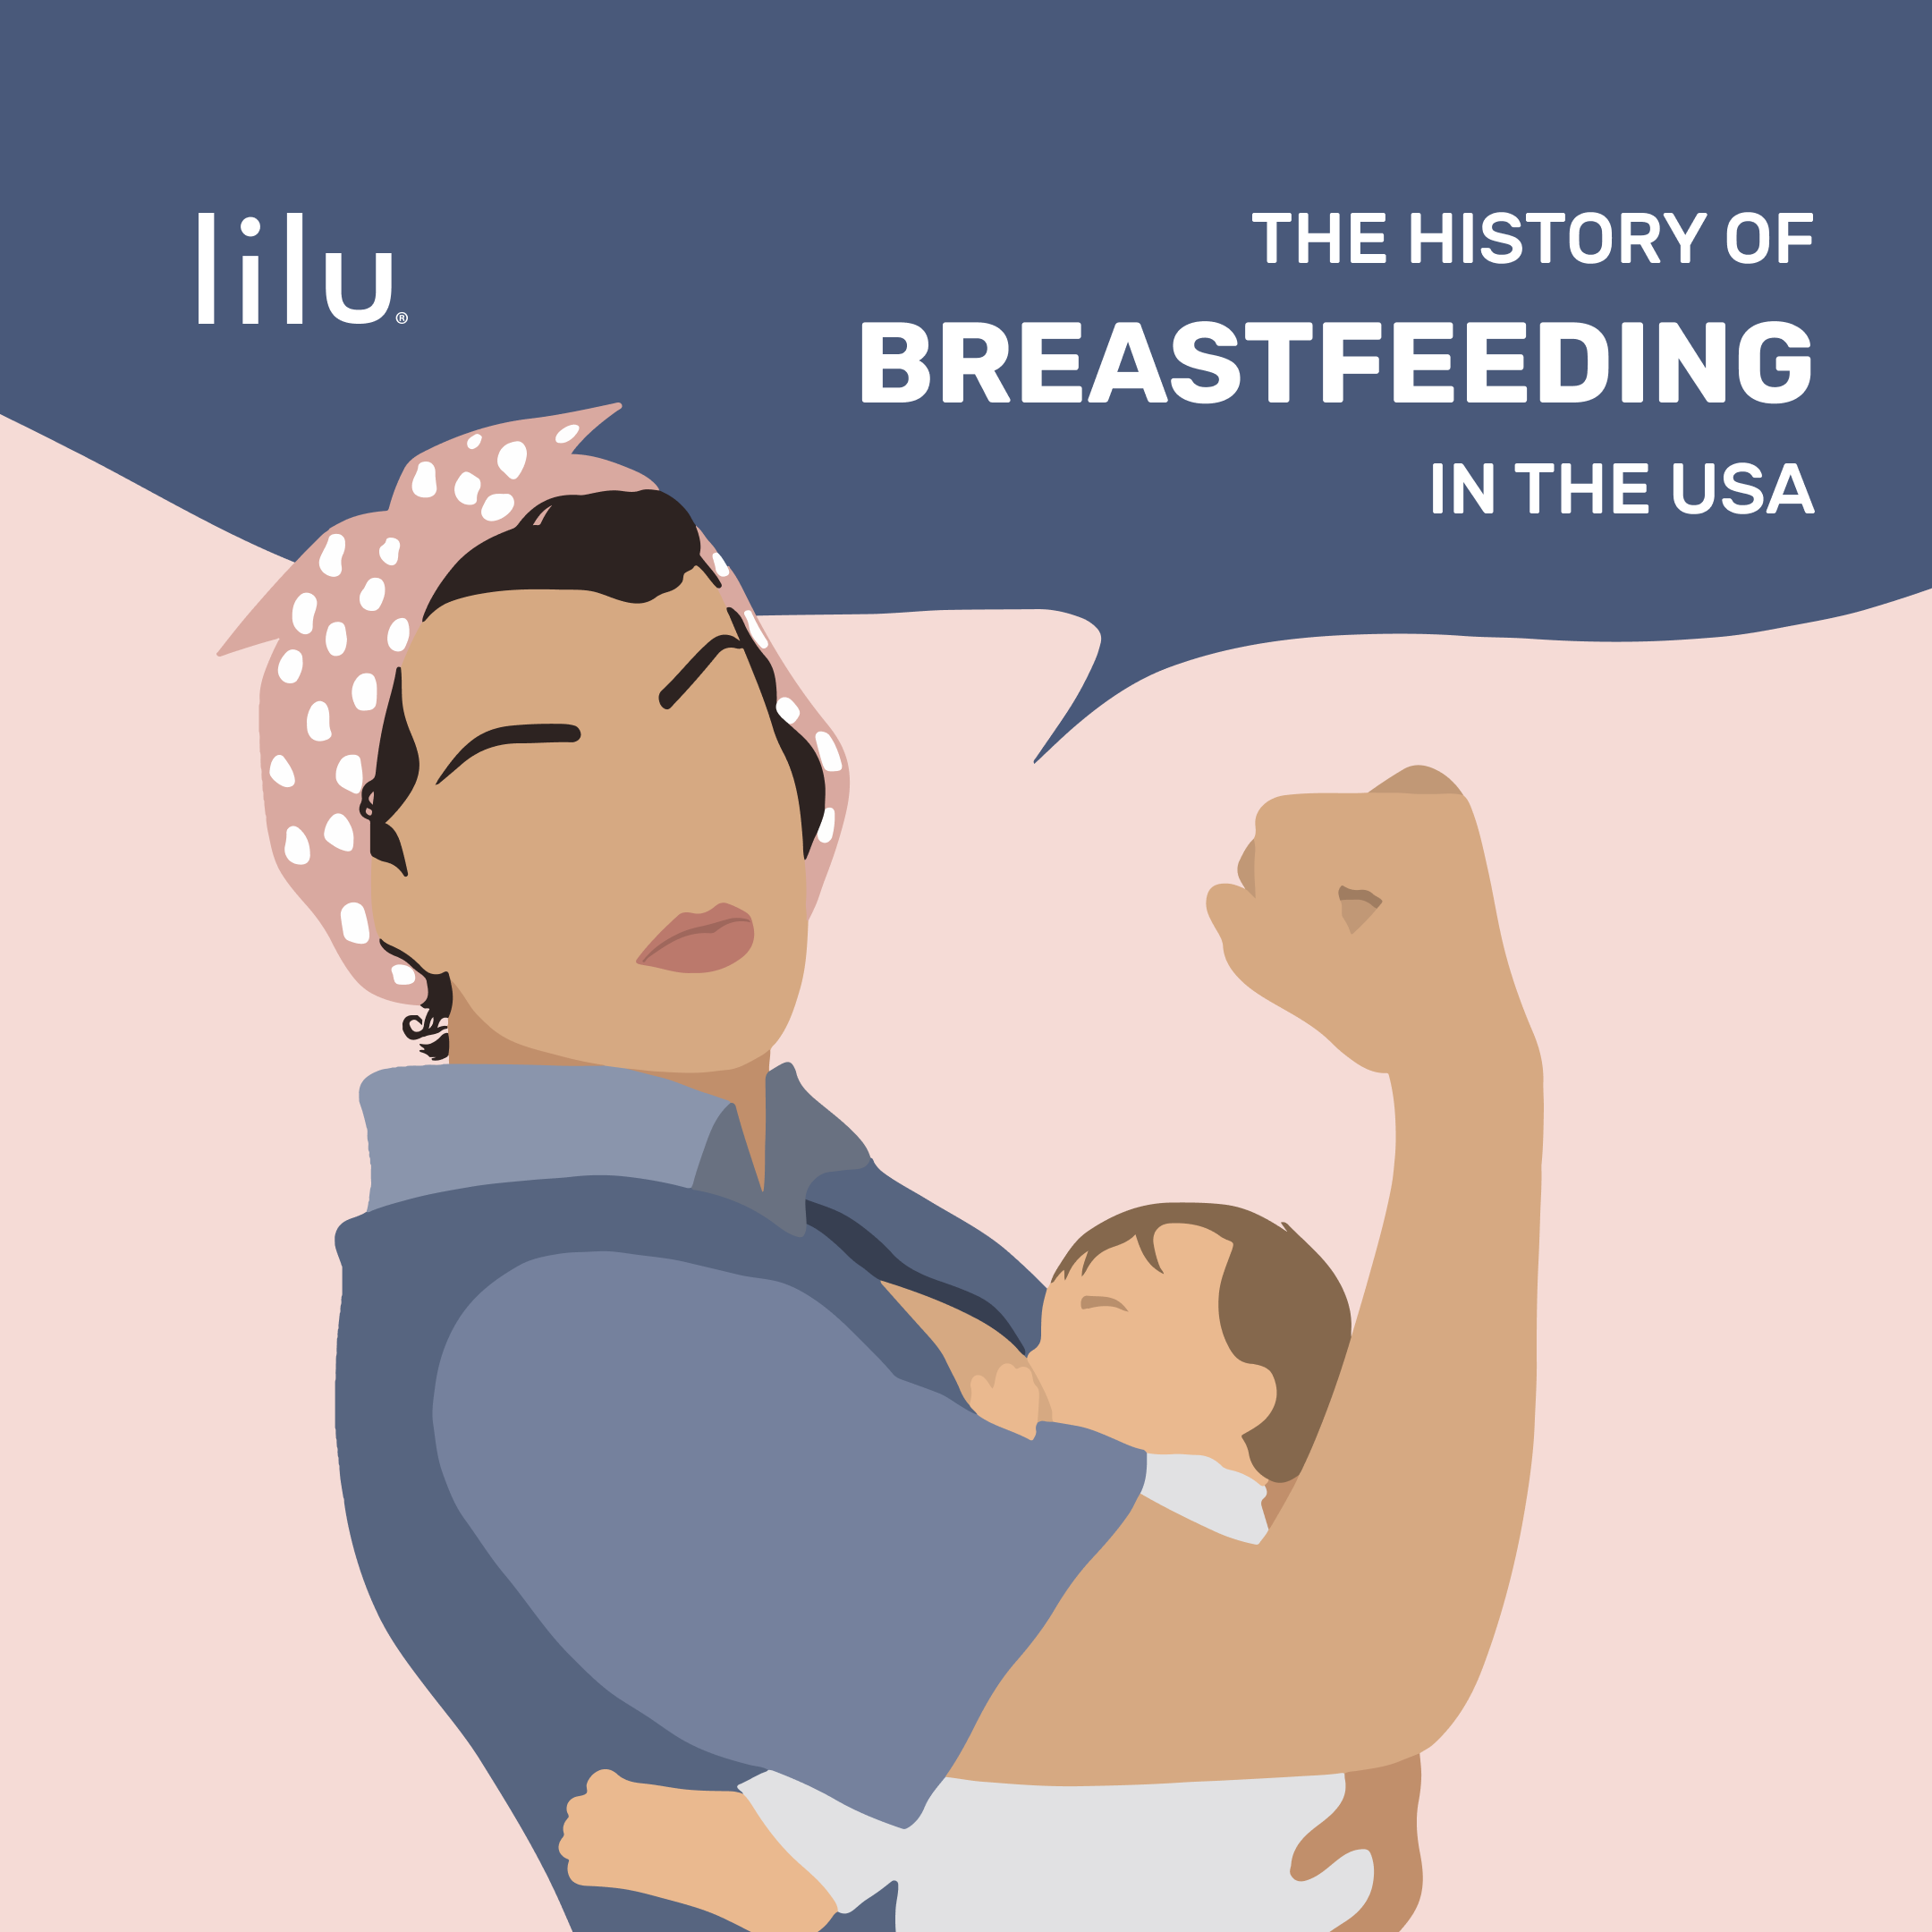 Breastfeeding in the USA: A Brief History